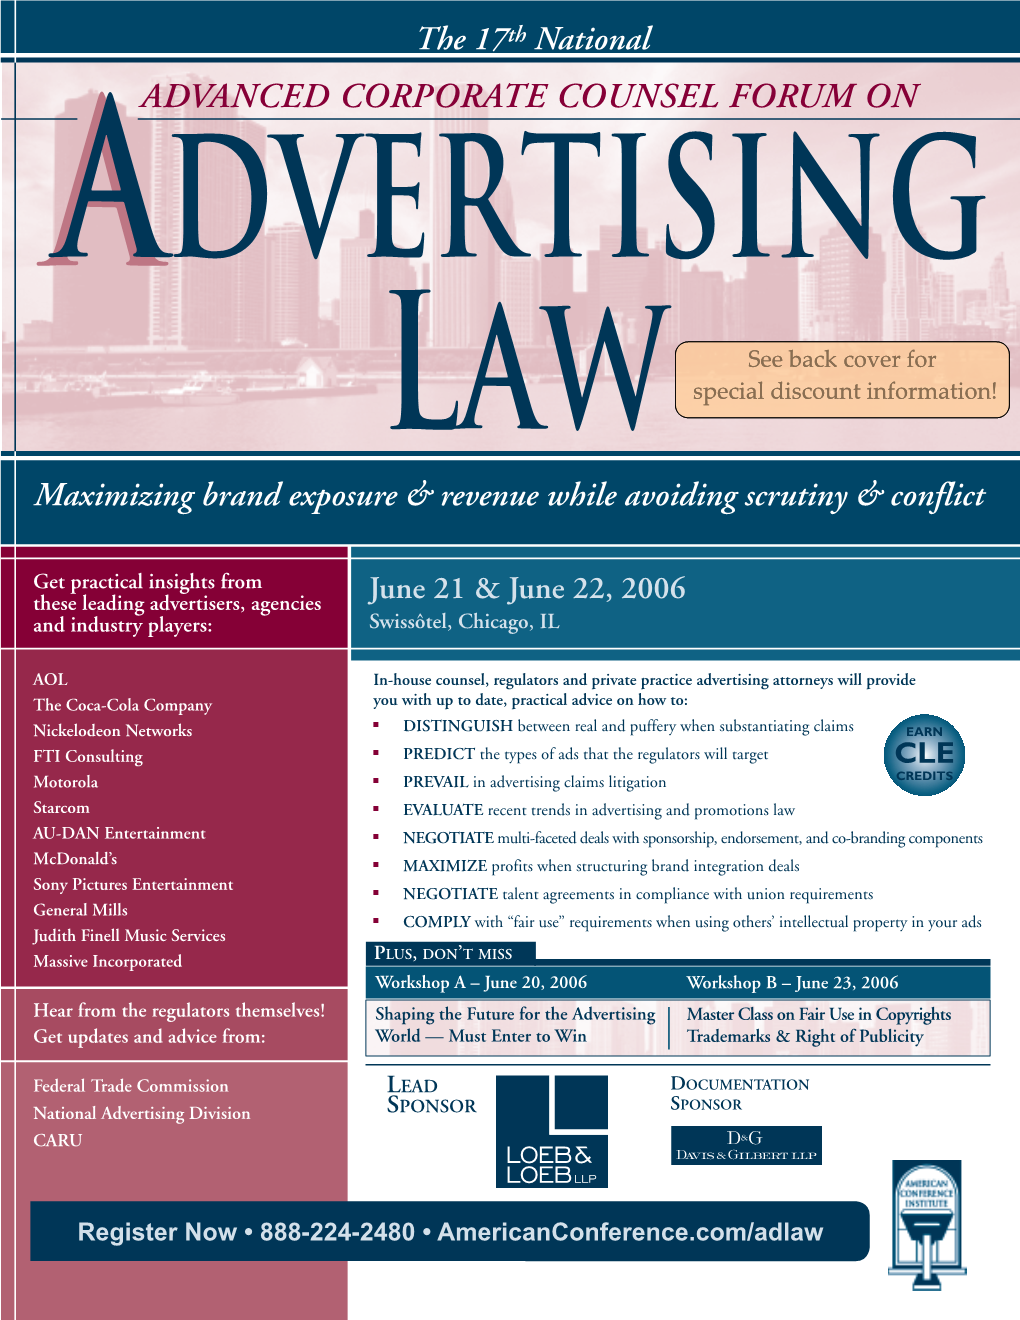 Advanced Corporate Counsel Forum on Law